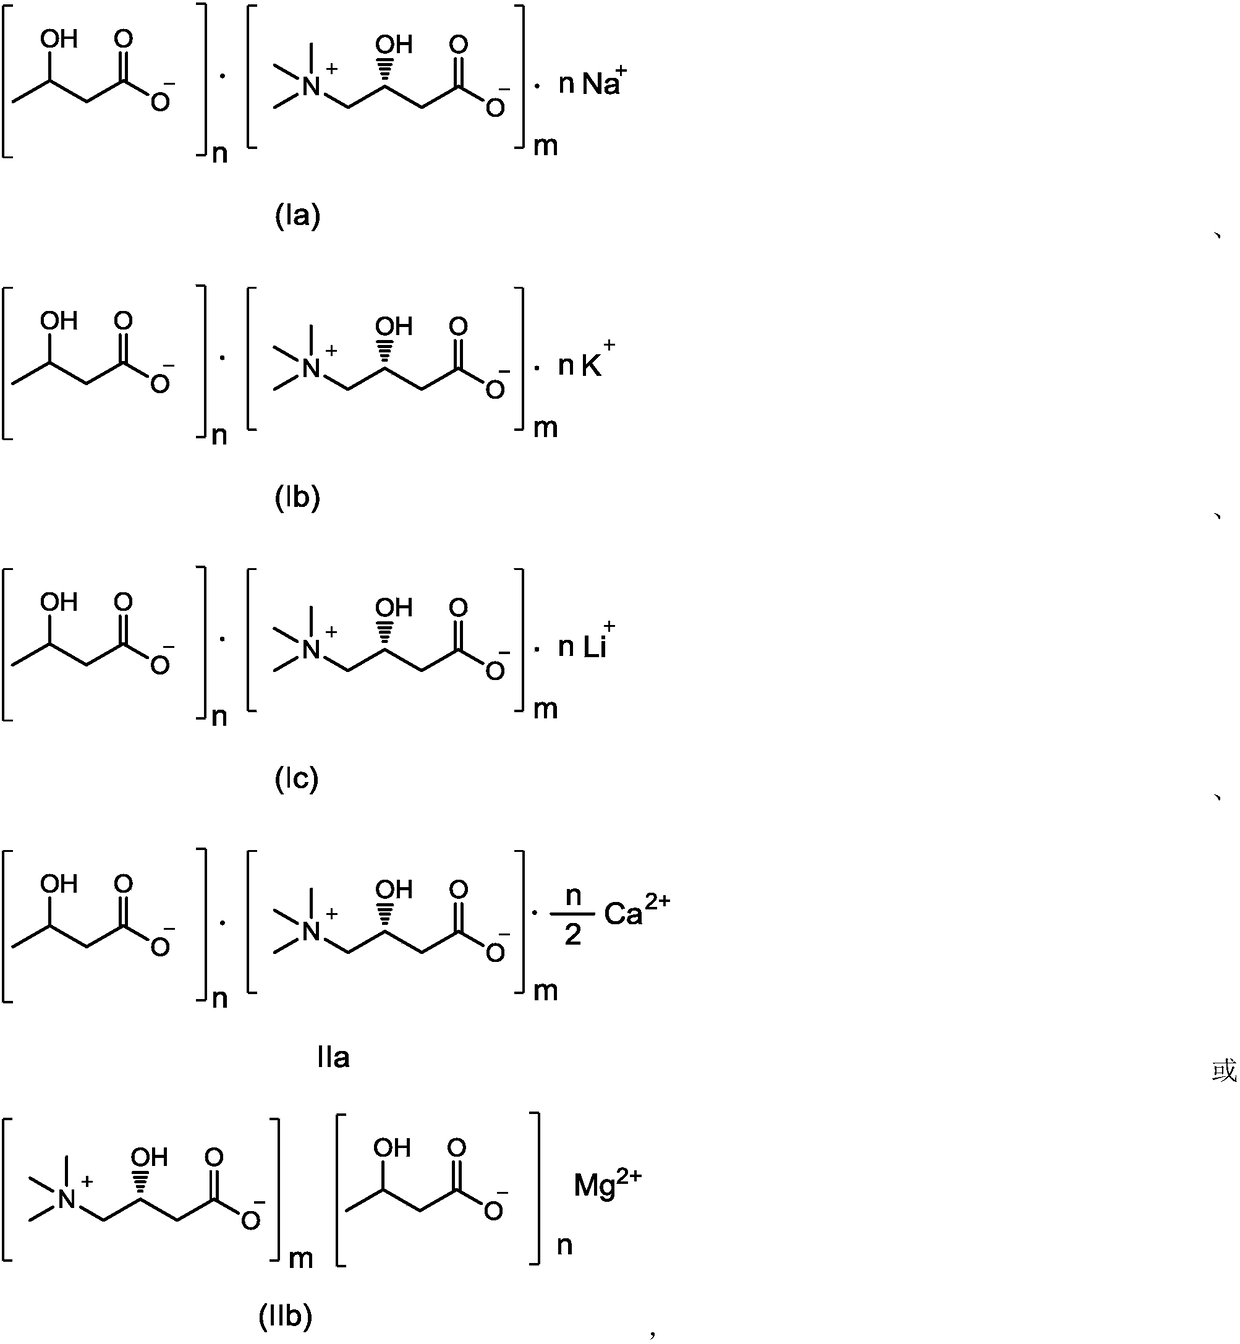 Composition containing L-carnitine and beta-hydroxybutyric acid compounds